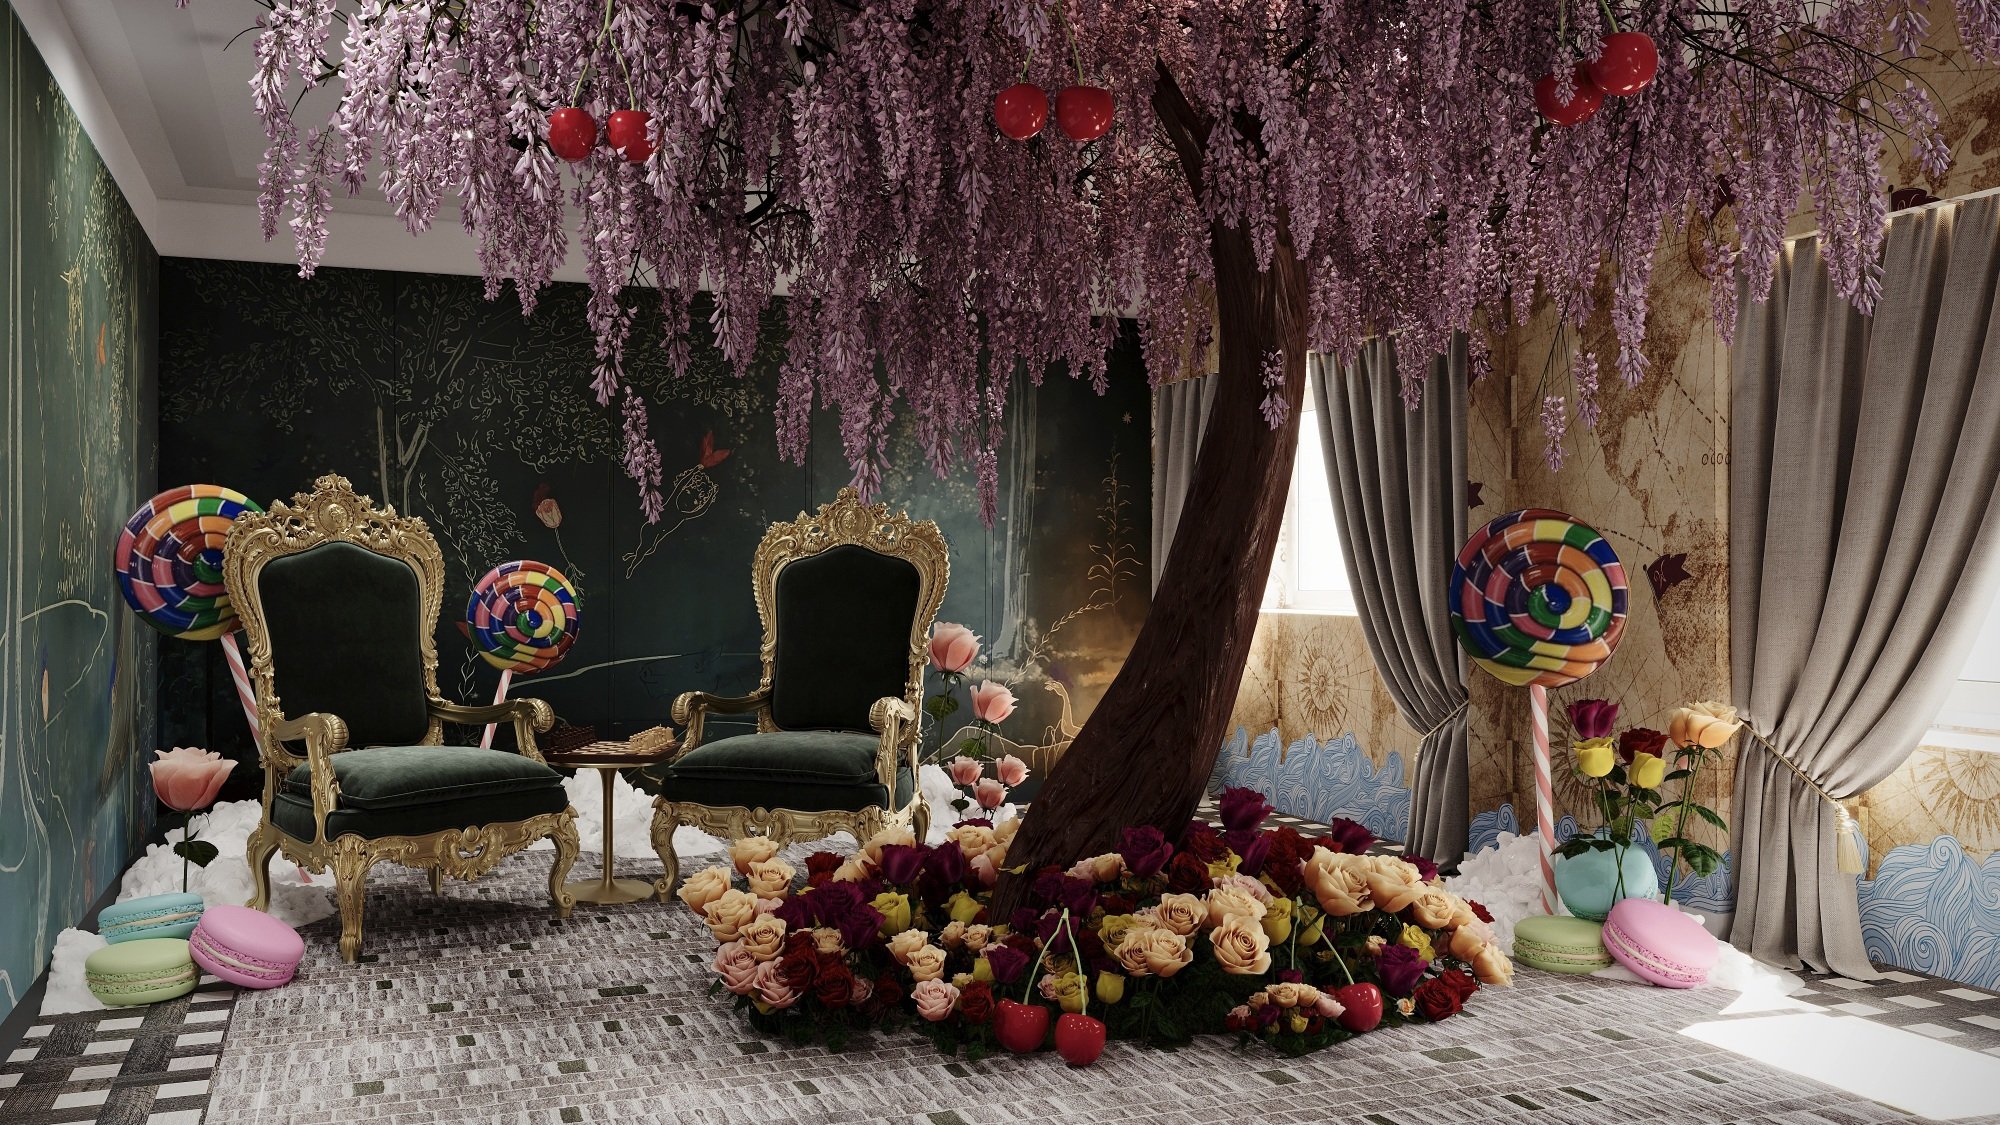 A "Wonka"-themed hotel room with a large chocolate tree at its center.